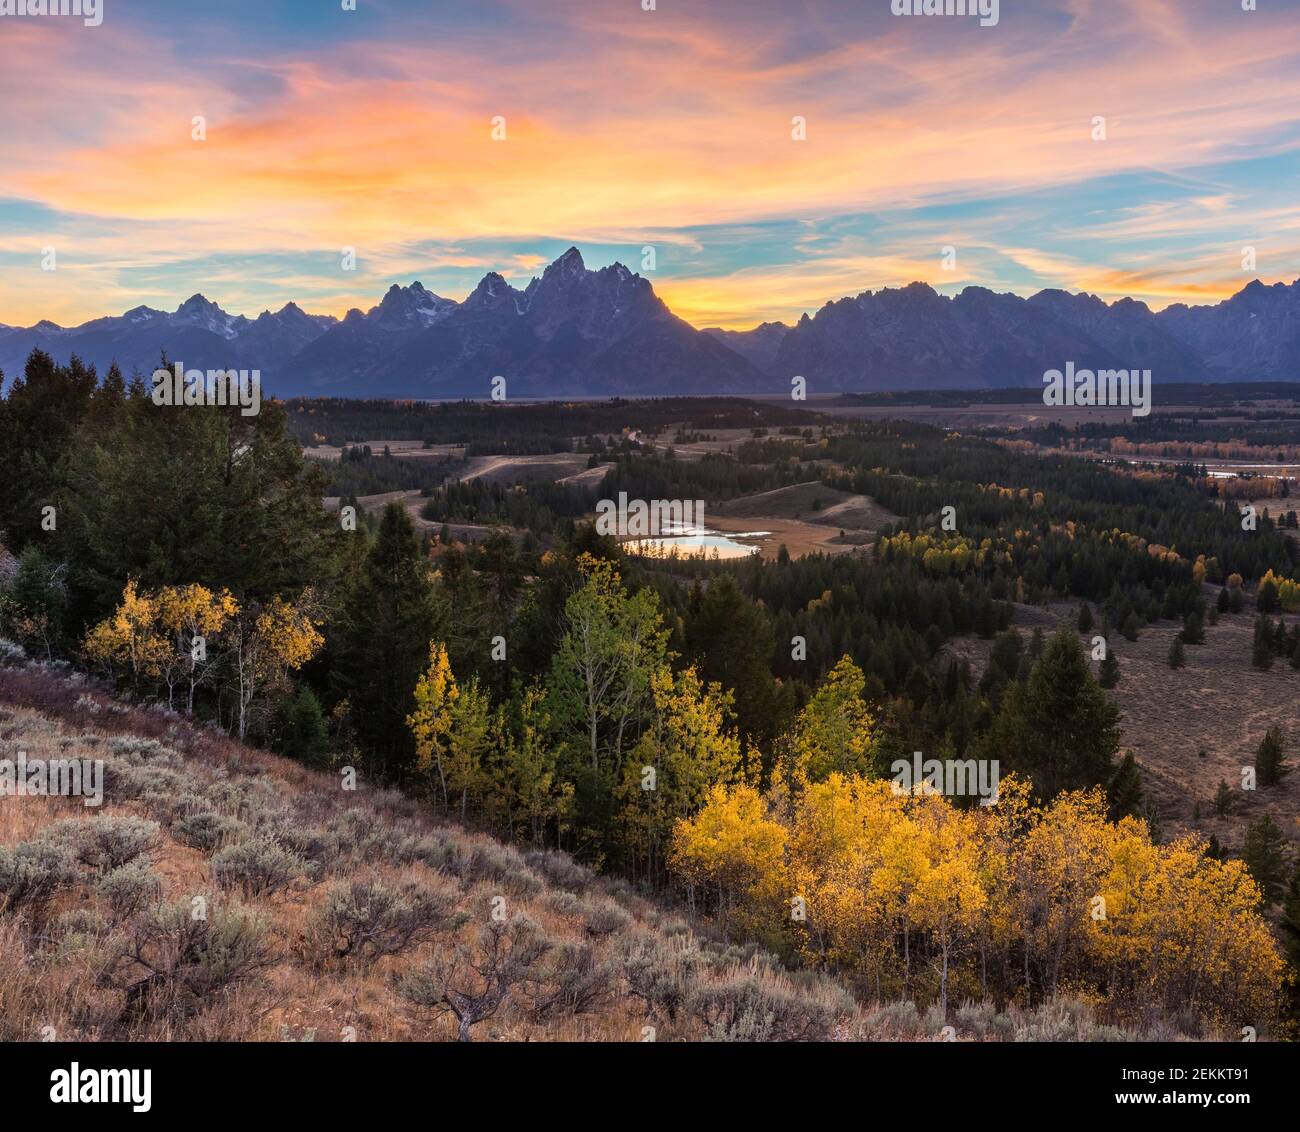 Grand Teton National Park, WY: Colorful sunset over the Teton Range overlooking the Snake River Valley Stock Photo